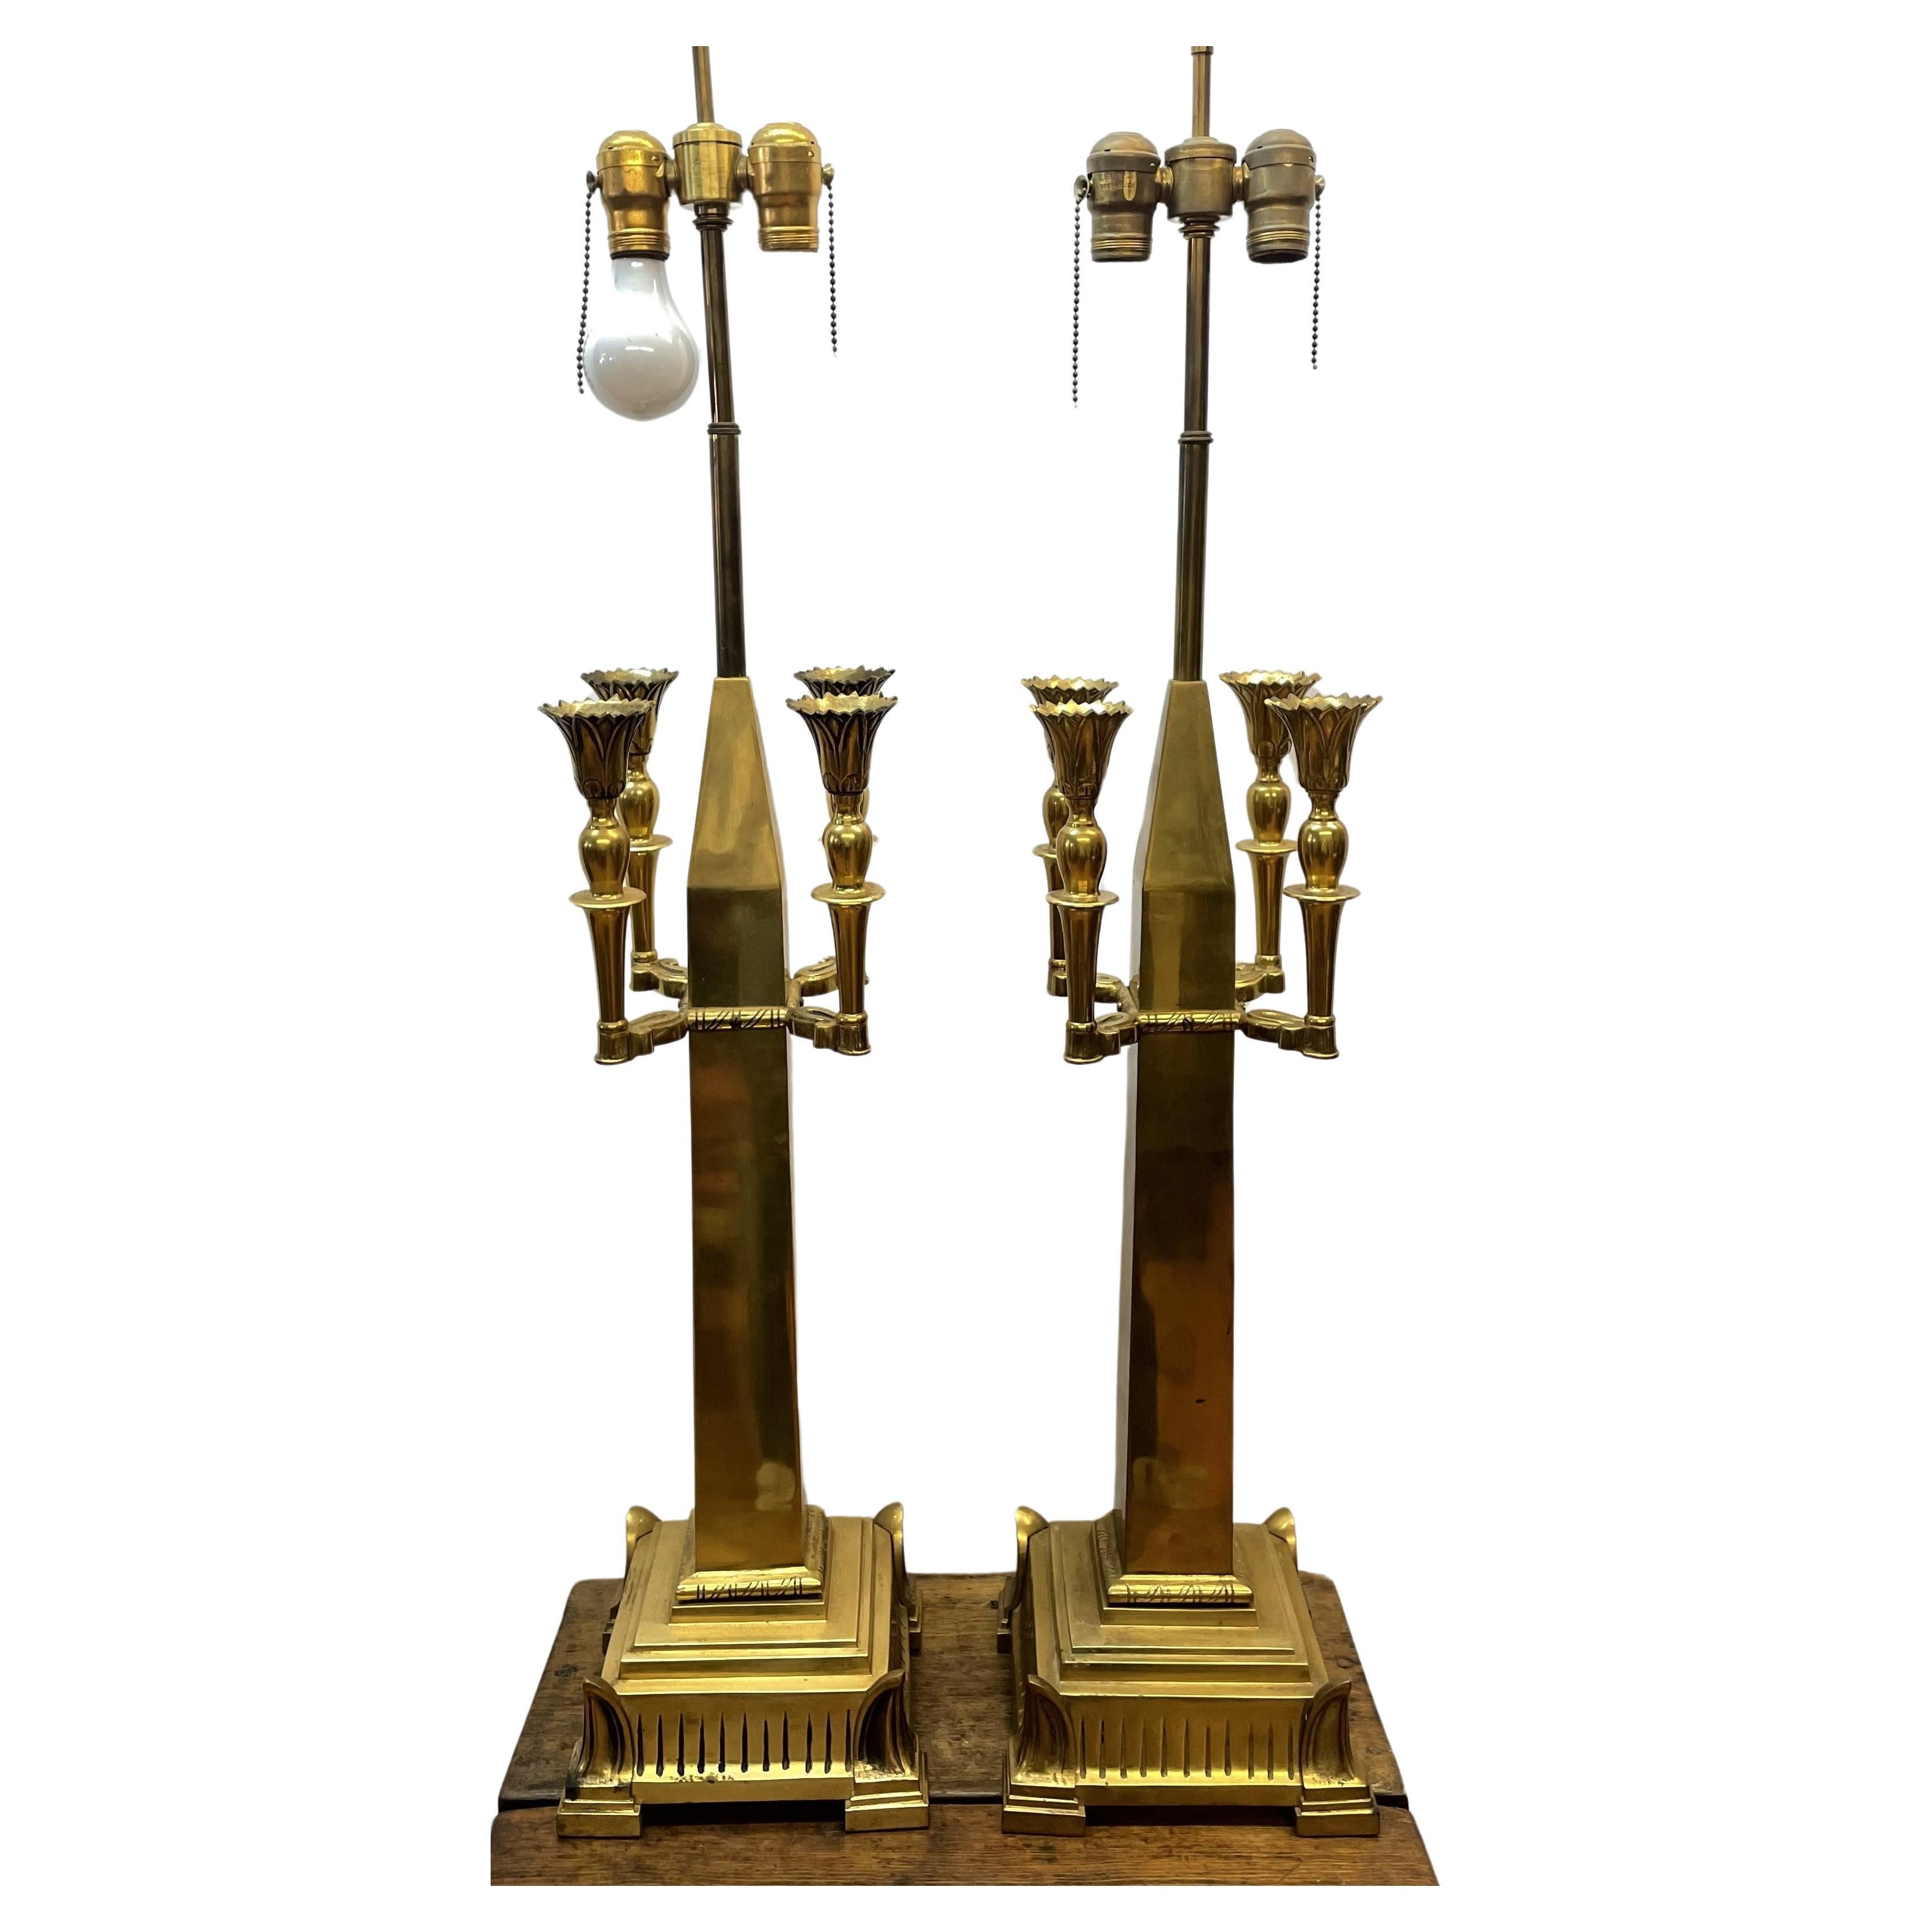 Pair of brass cathedral-style lamps with four candleholders each